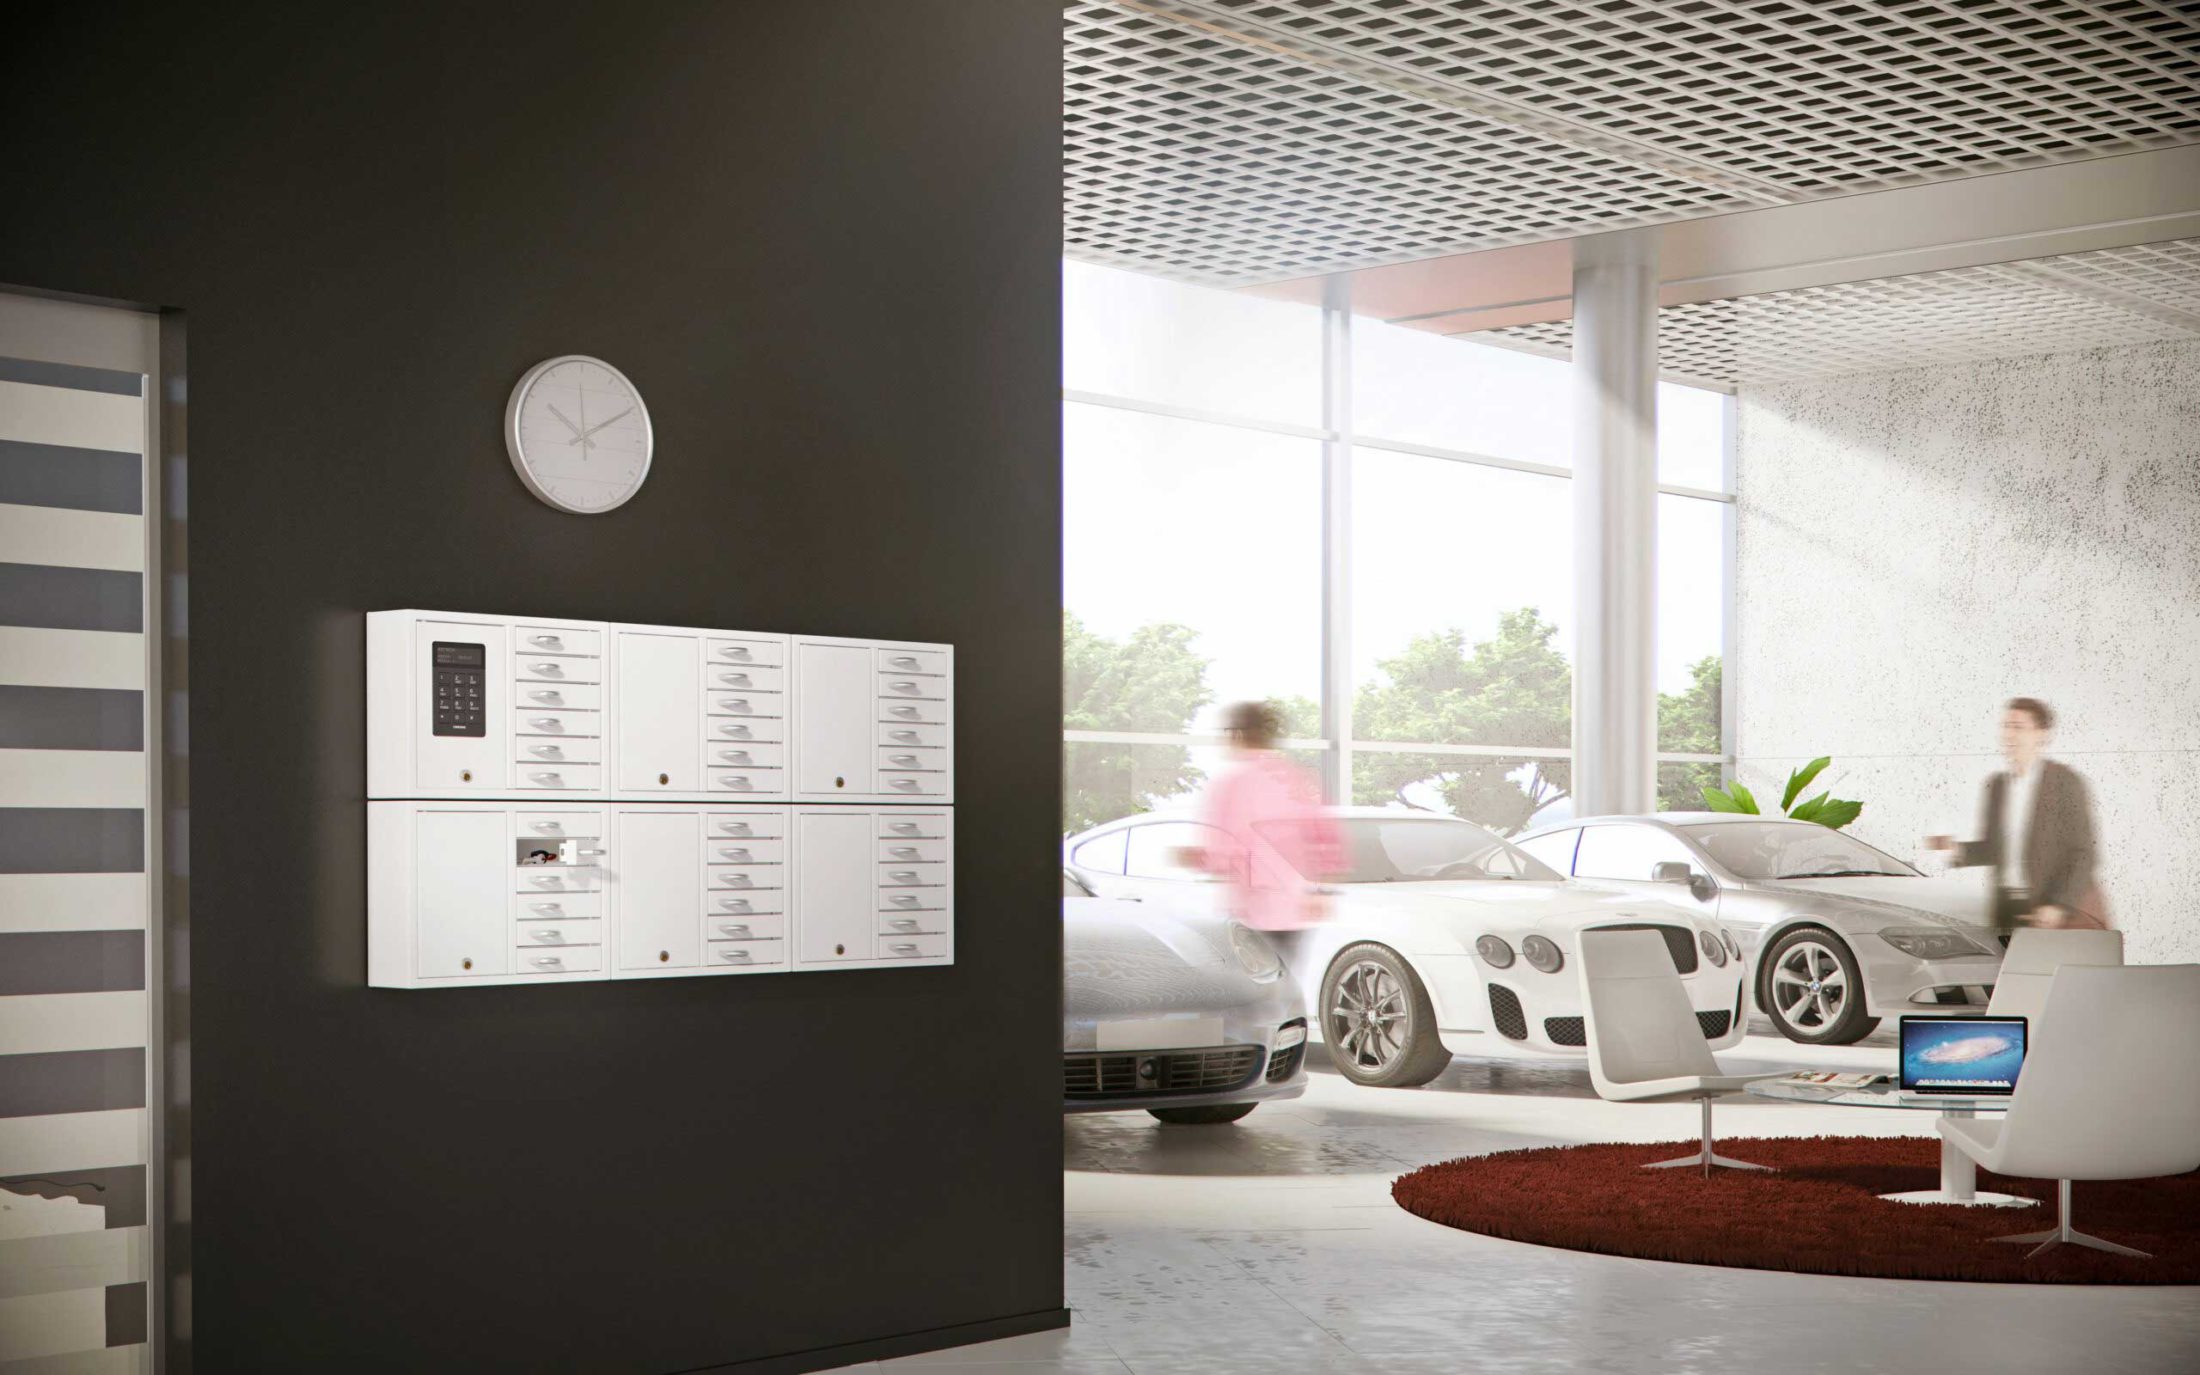 The 9006 S key cabinet from the System series plus five of the 9006 E from the Expansion series is handling the car company's key management. Mounted on the wall with open compartments containing car keys.